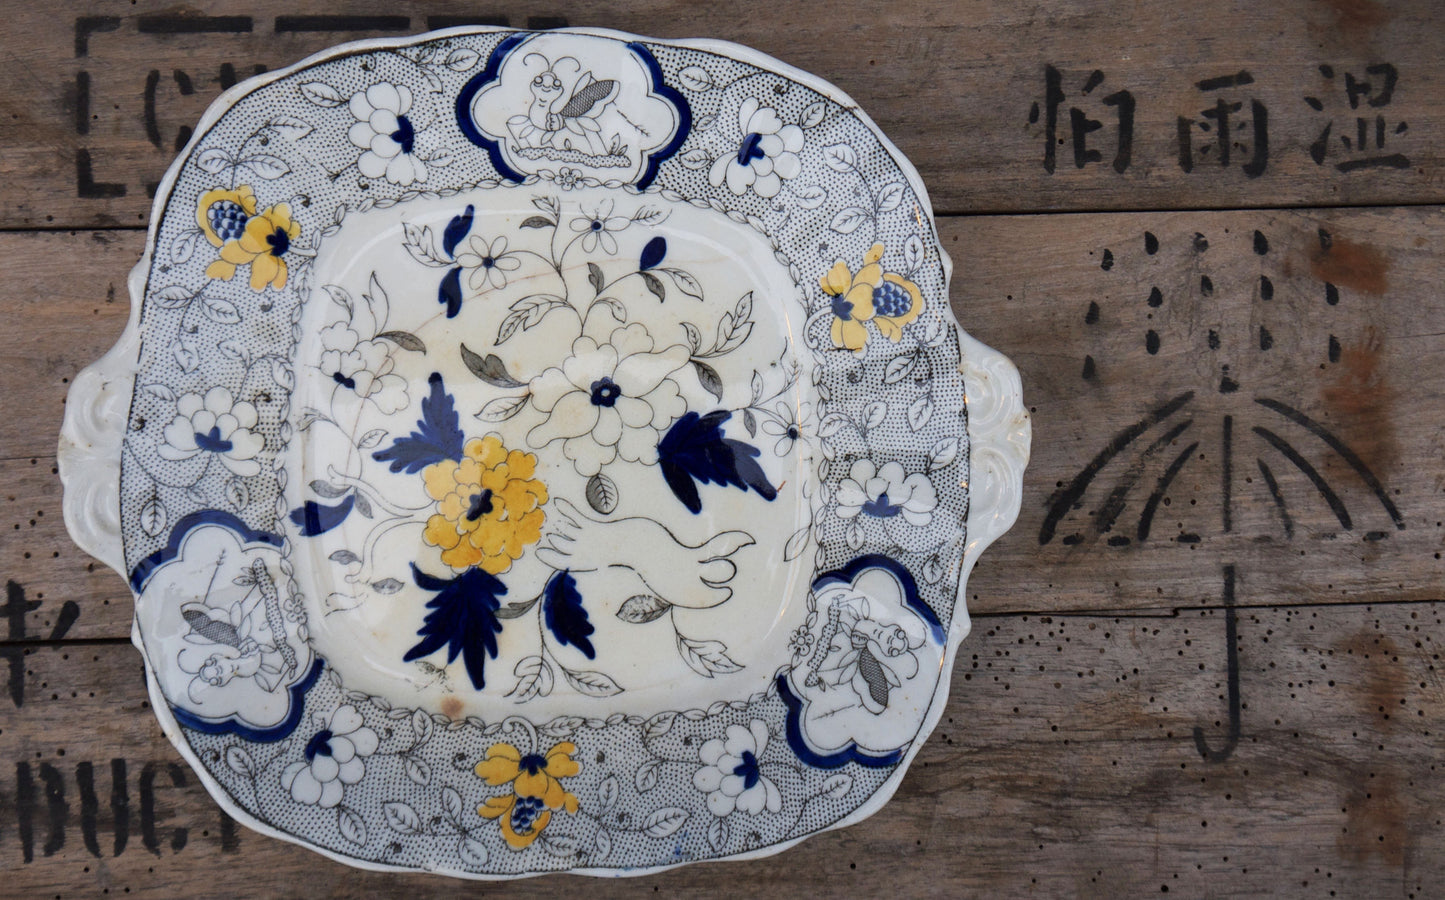 Gorgeous vintage blue and yellow cake plate. Some age related marks, crazing and hairline crack but the plate is still solid and beautiful!